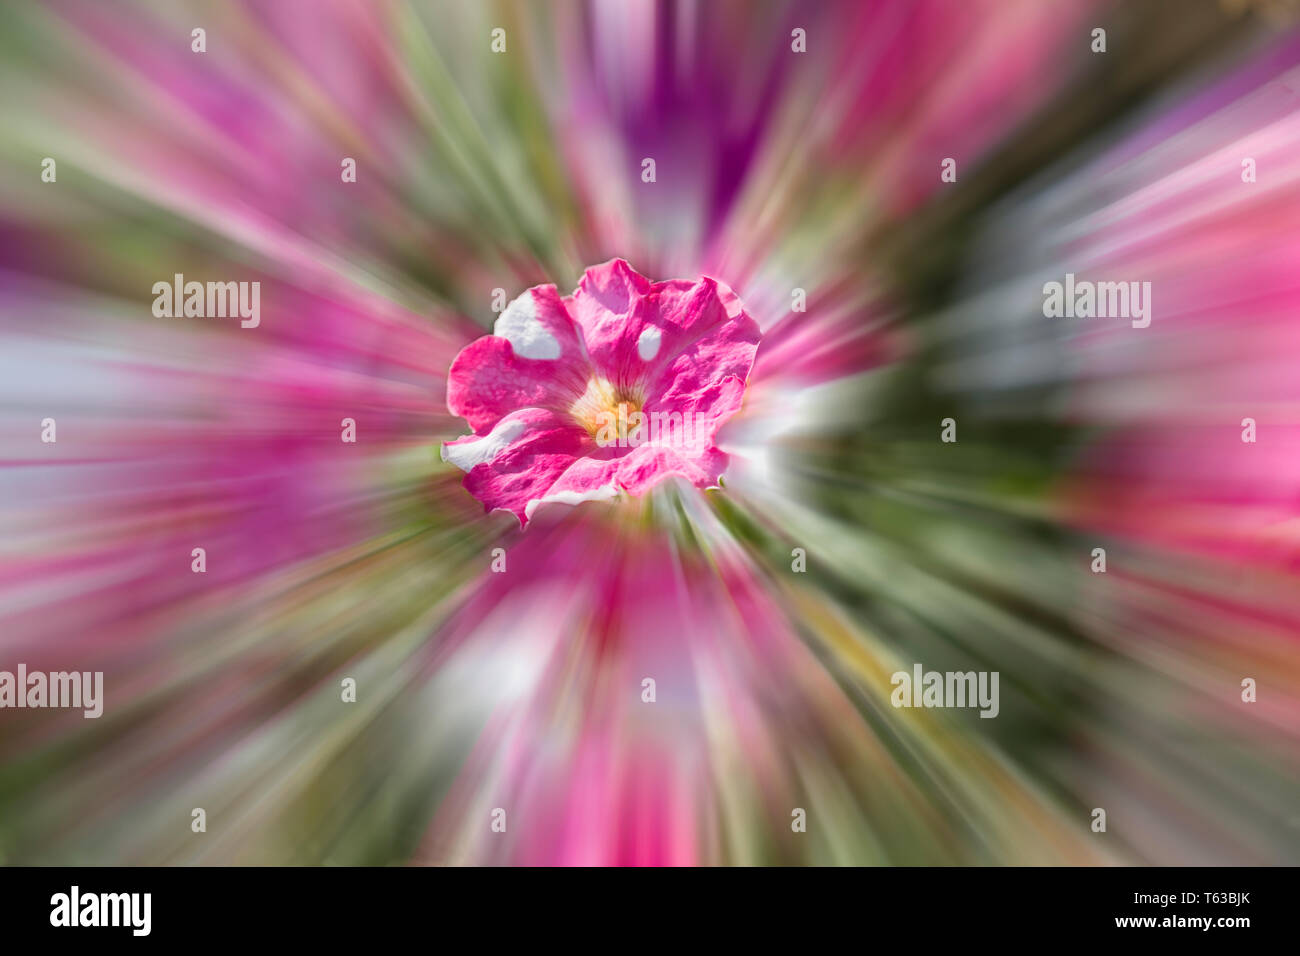 pattern of flowers background is Realistic photo collage Stock Photo